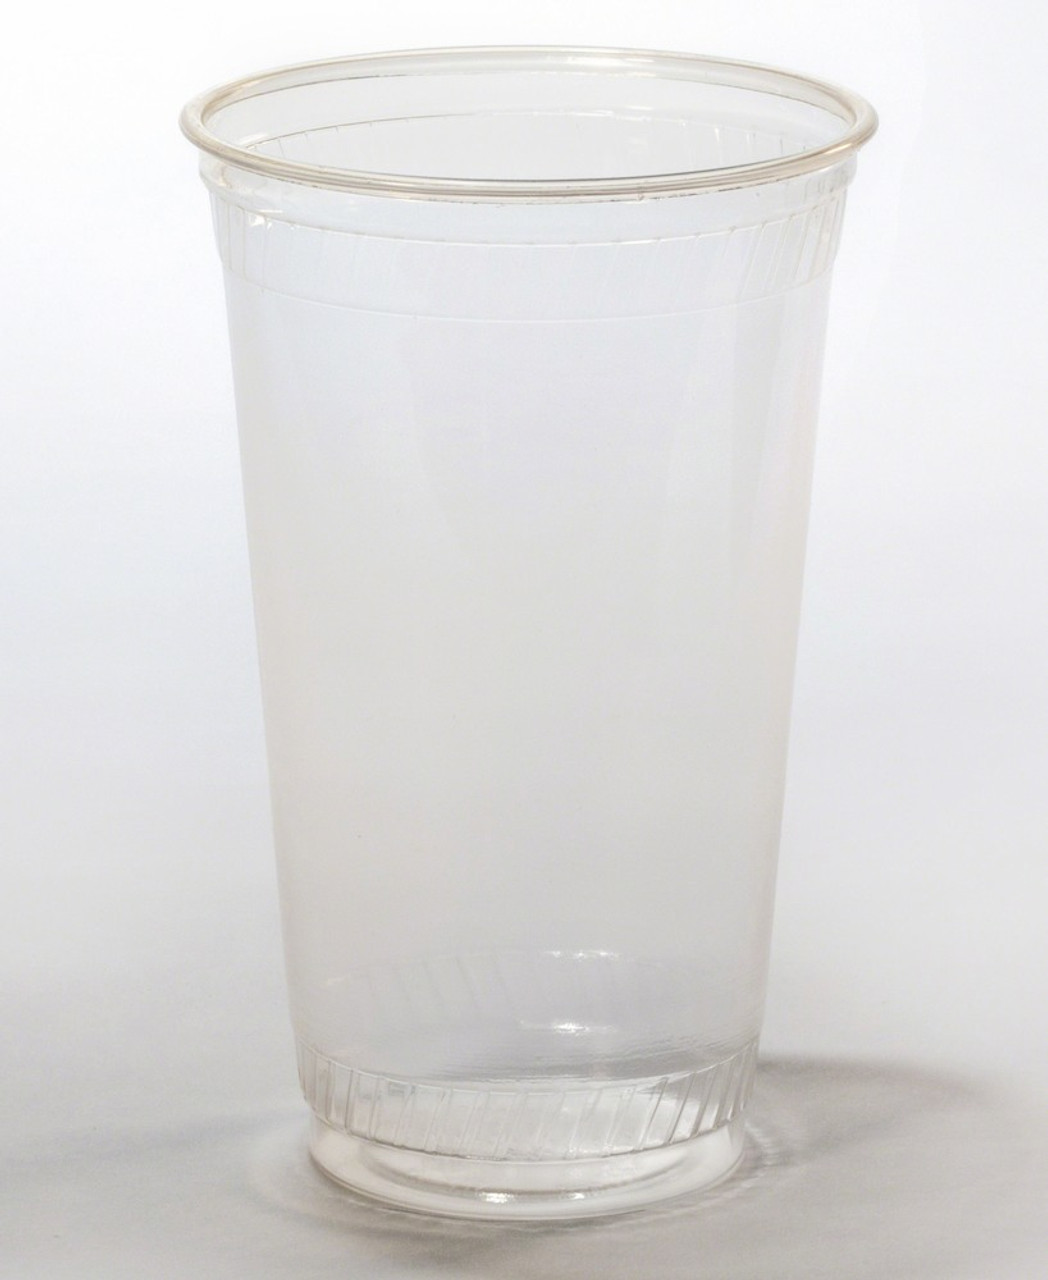 24 oz PLA Clear Cup